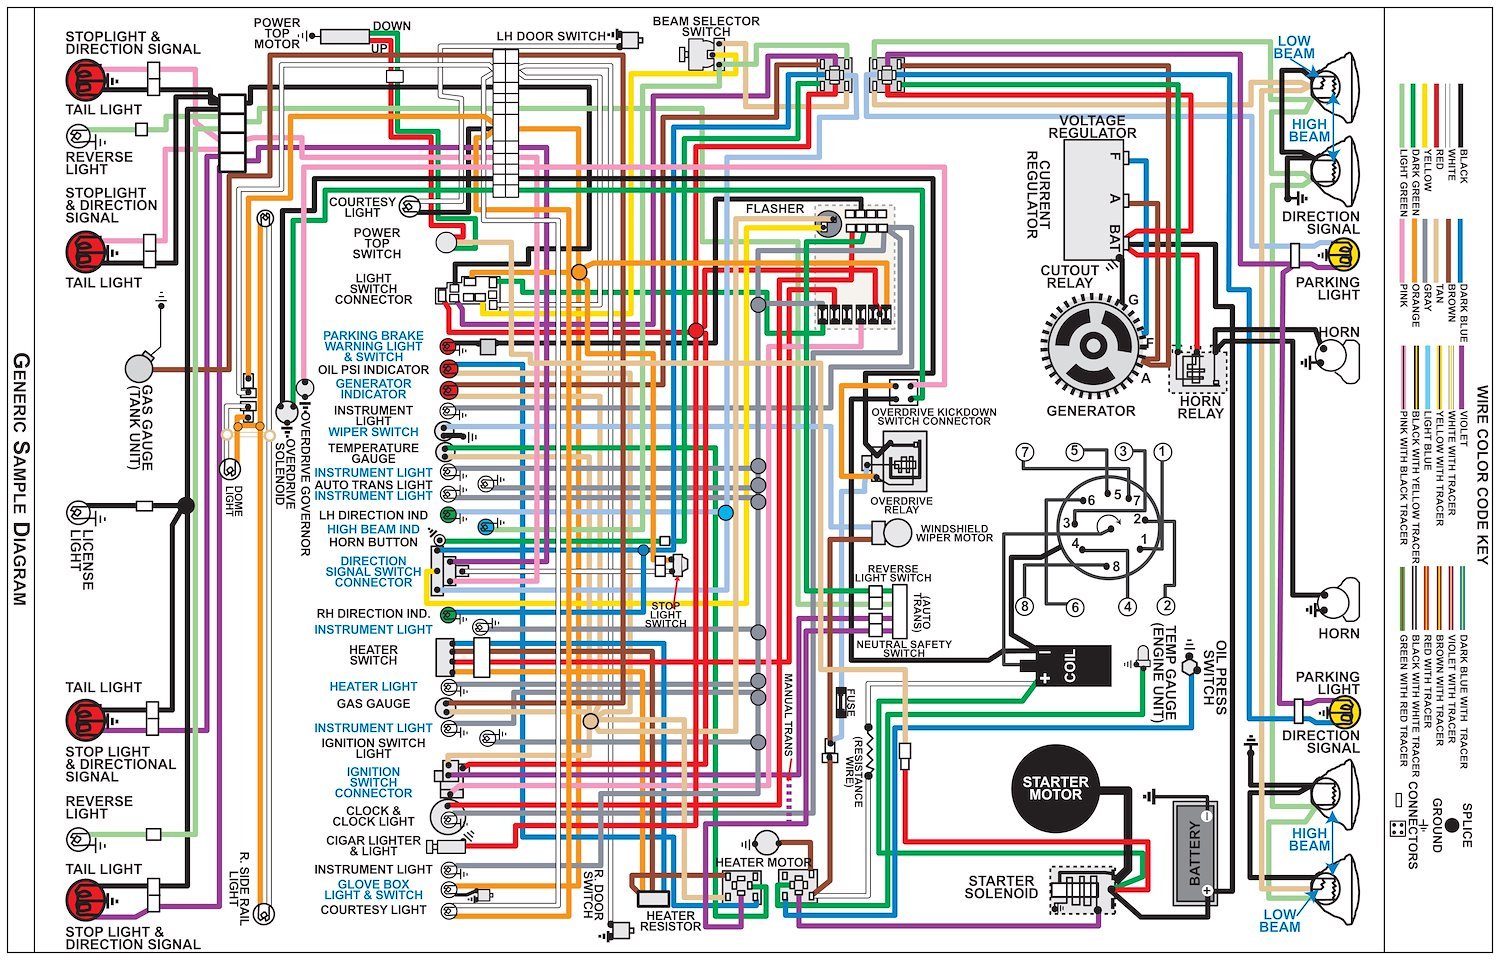 Wiring Diagram for 1973 Plymouth Barracuda with Rallye Dash, 11 in x 17 in., Laminated